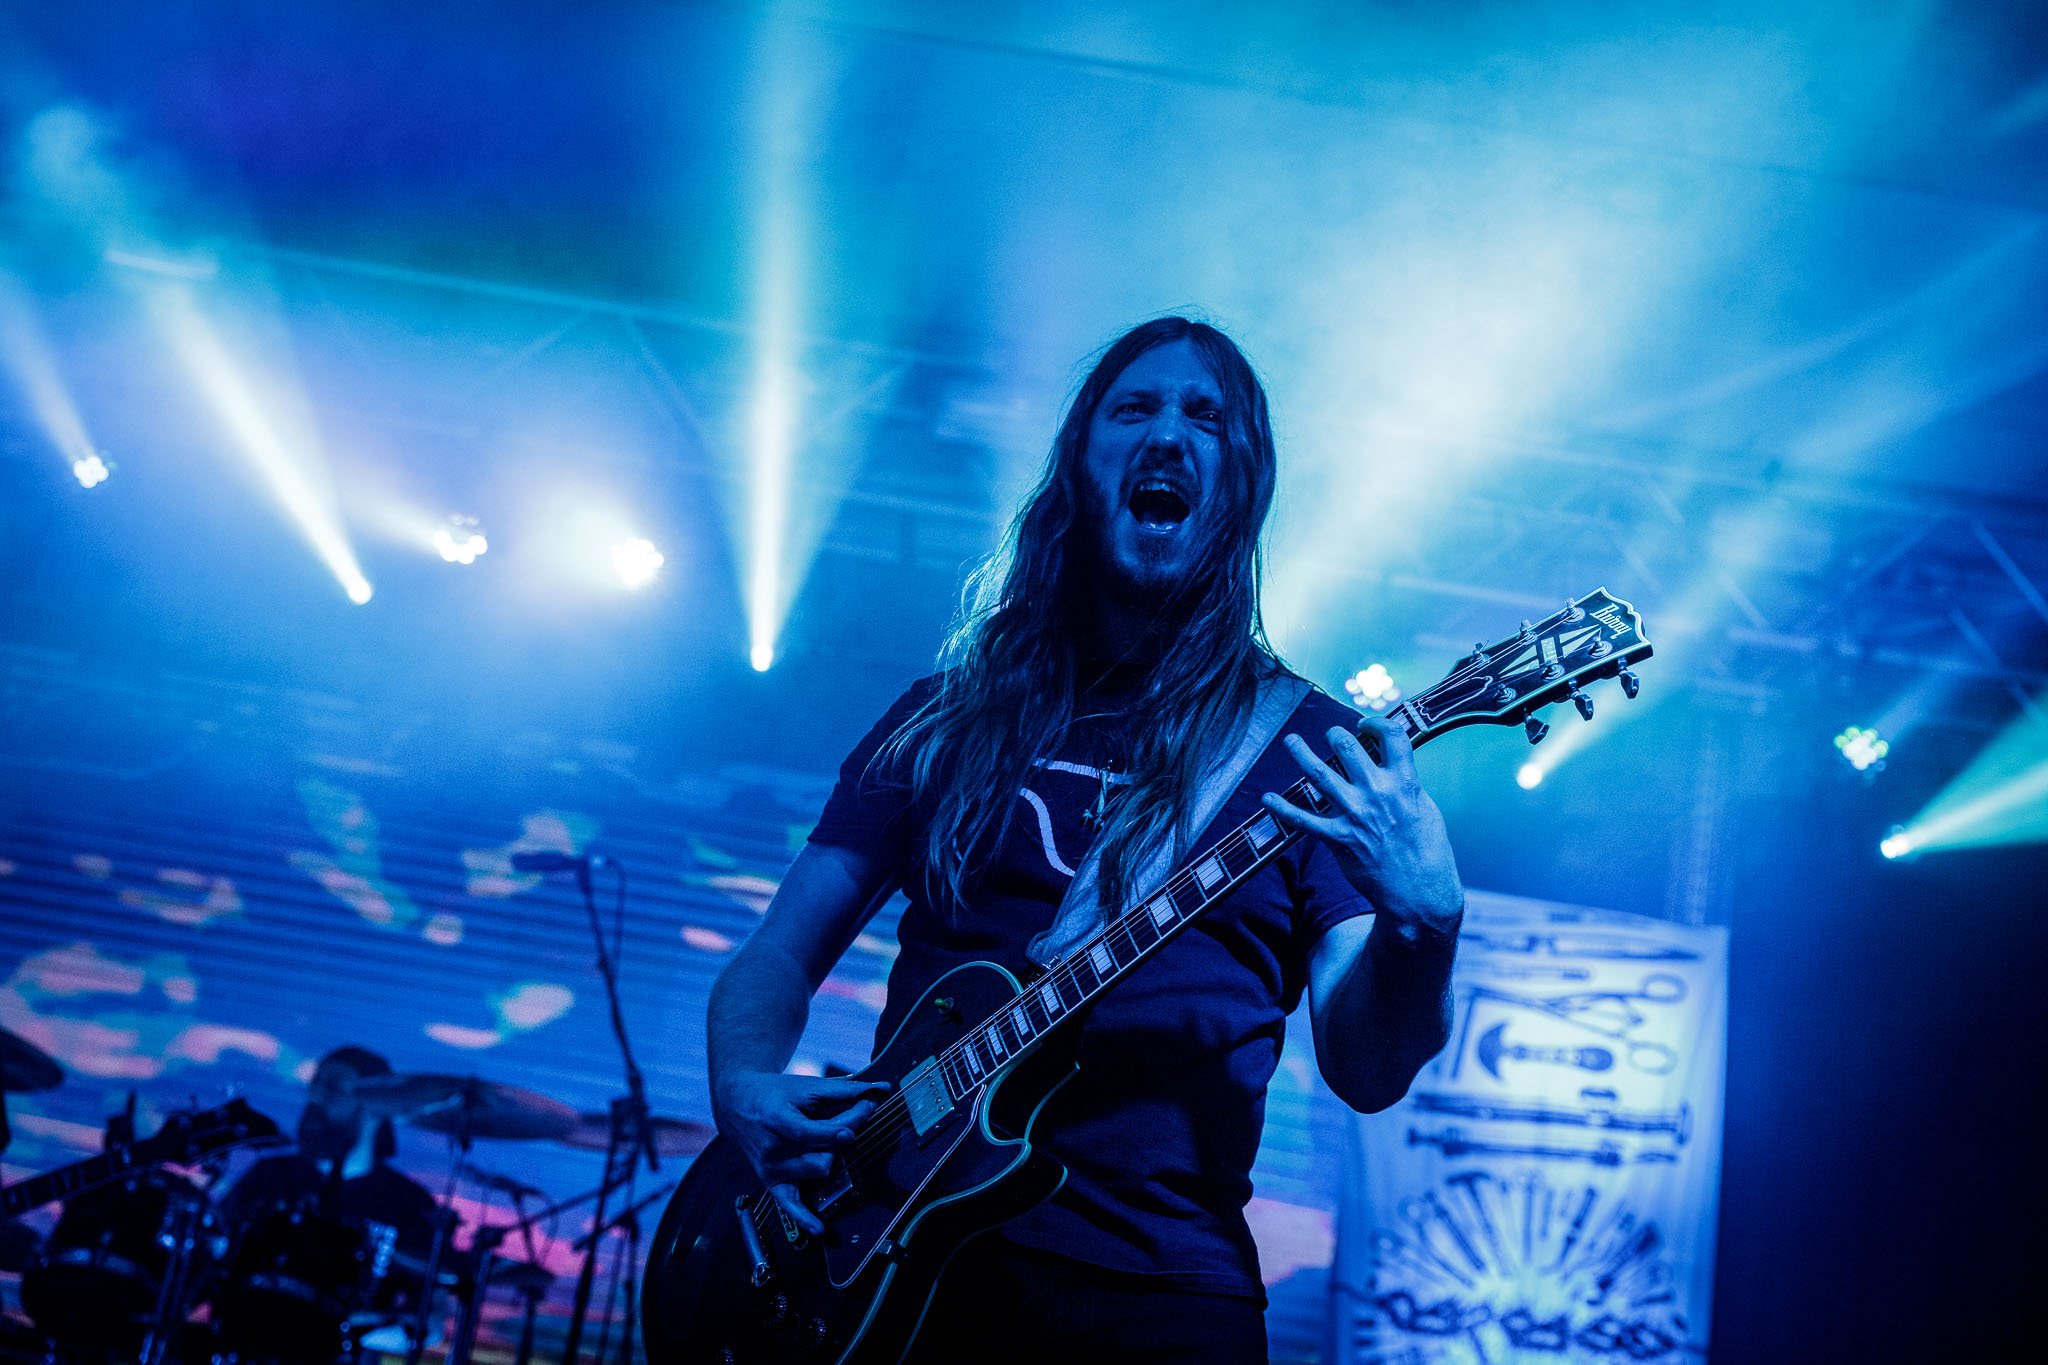 Carcass at the Damnation Festival in Leeds on November 6th 2021 